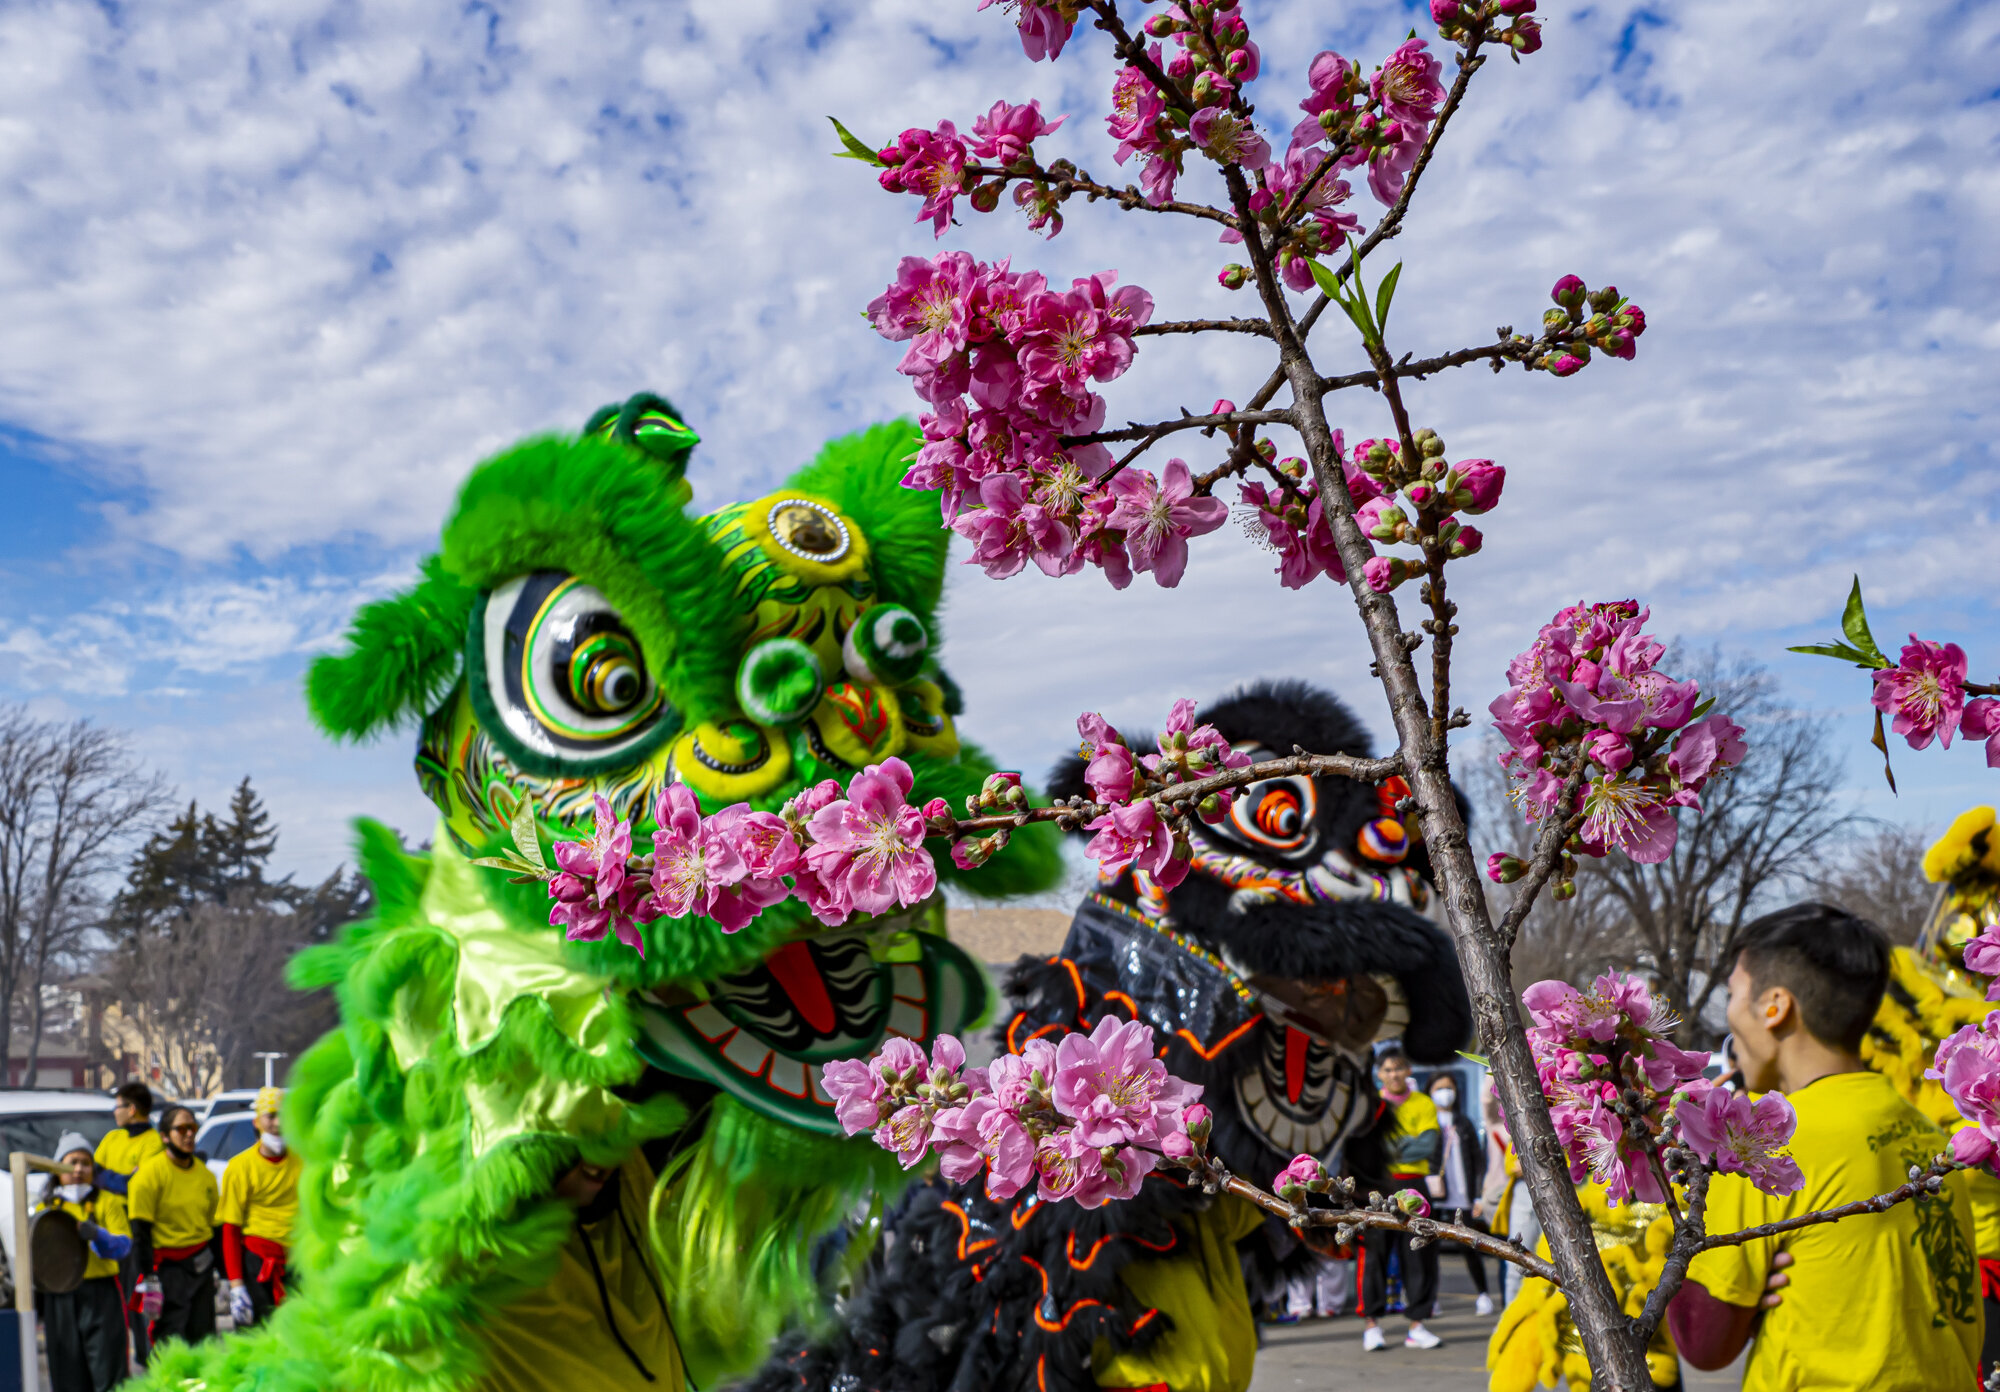 Green and Black Lions with Cherry Blossoms, Lunar New Year 2020